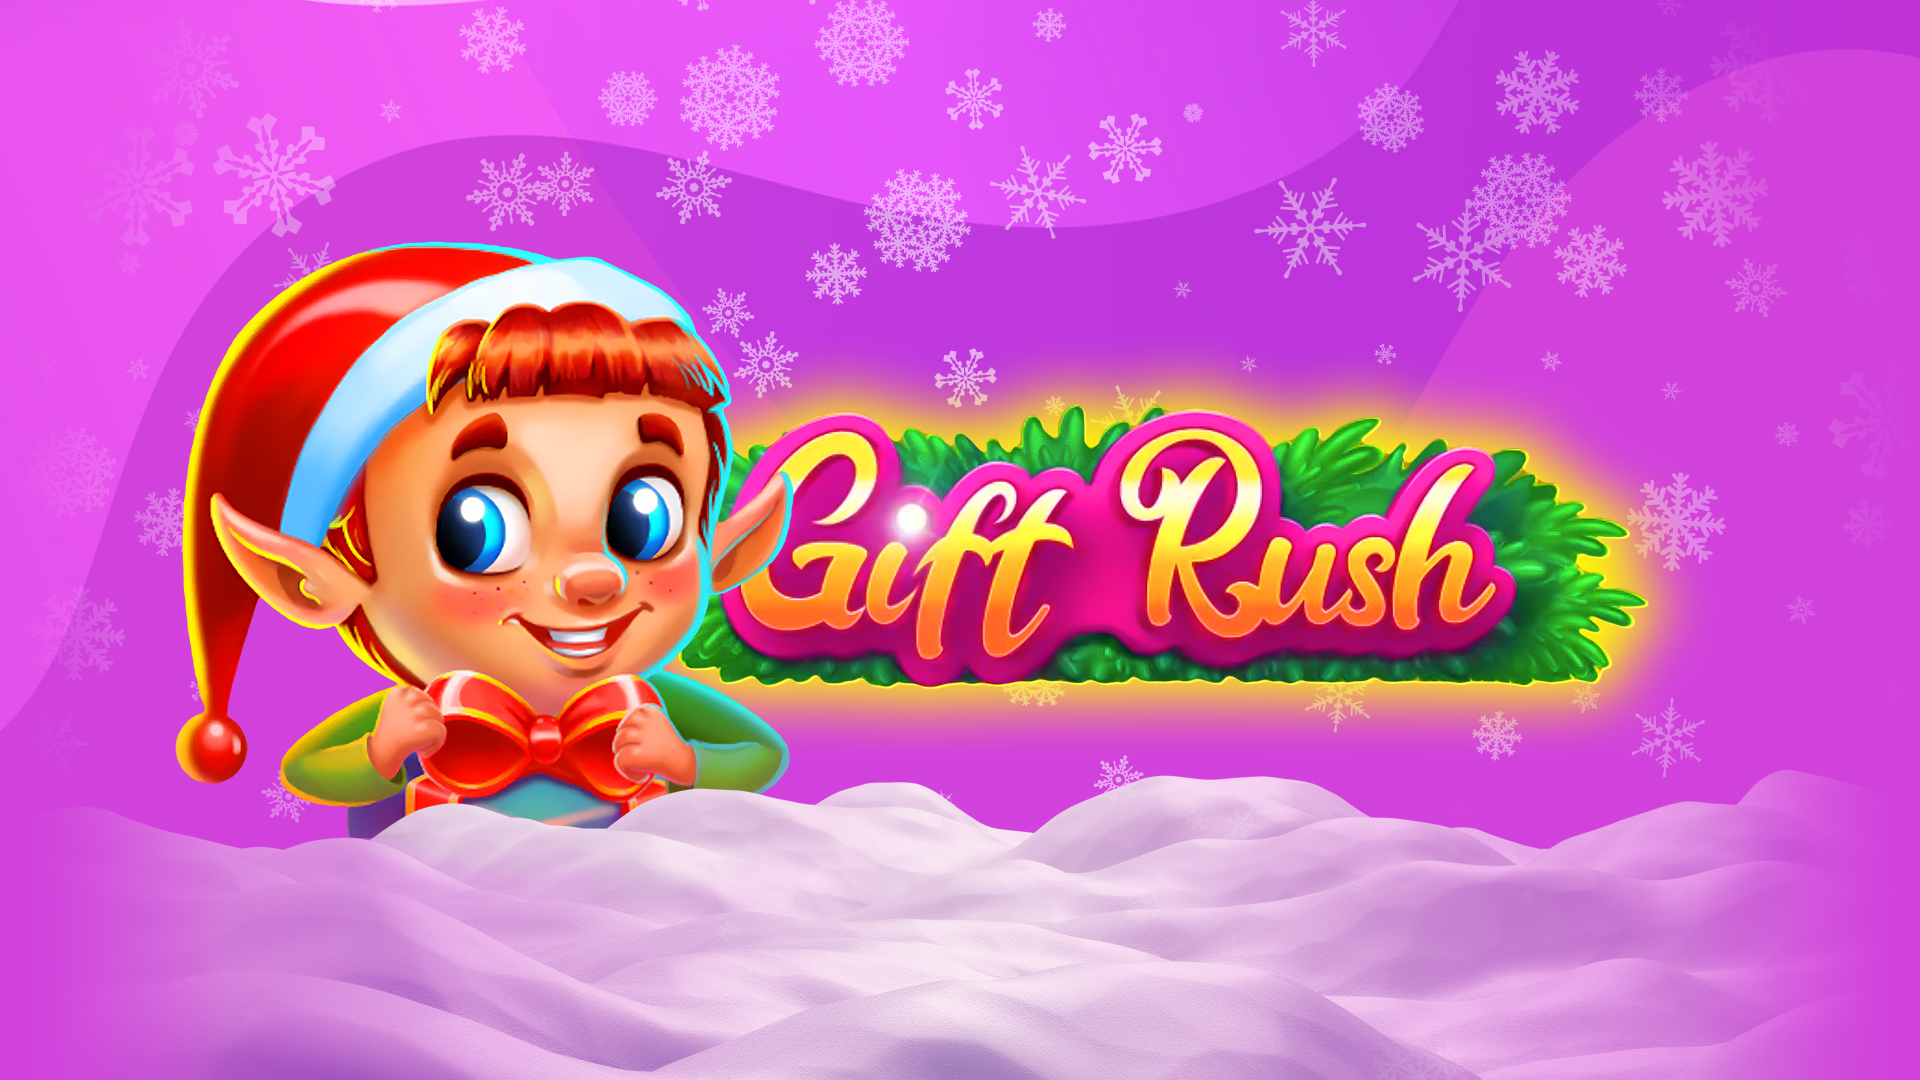 Cute Elf with Gift Rush slot logo, on a bright purple background.